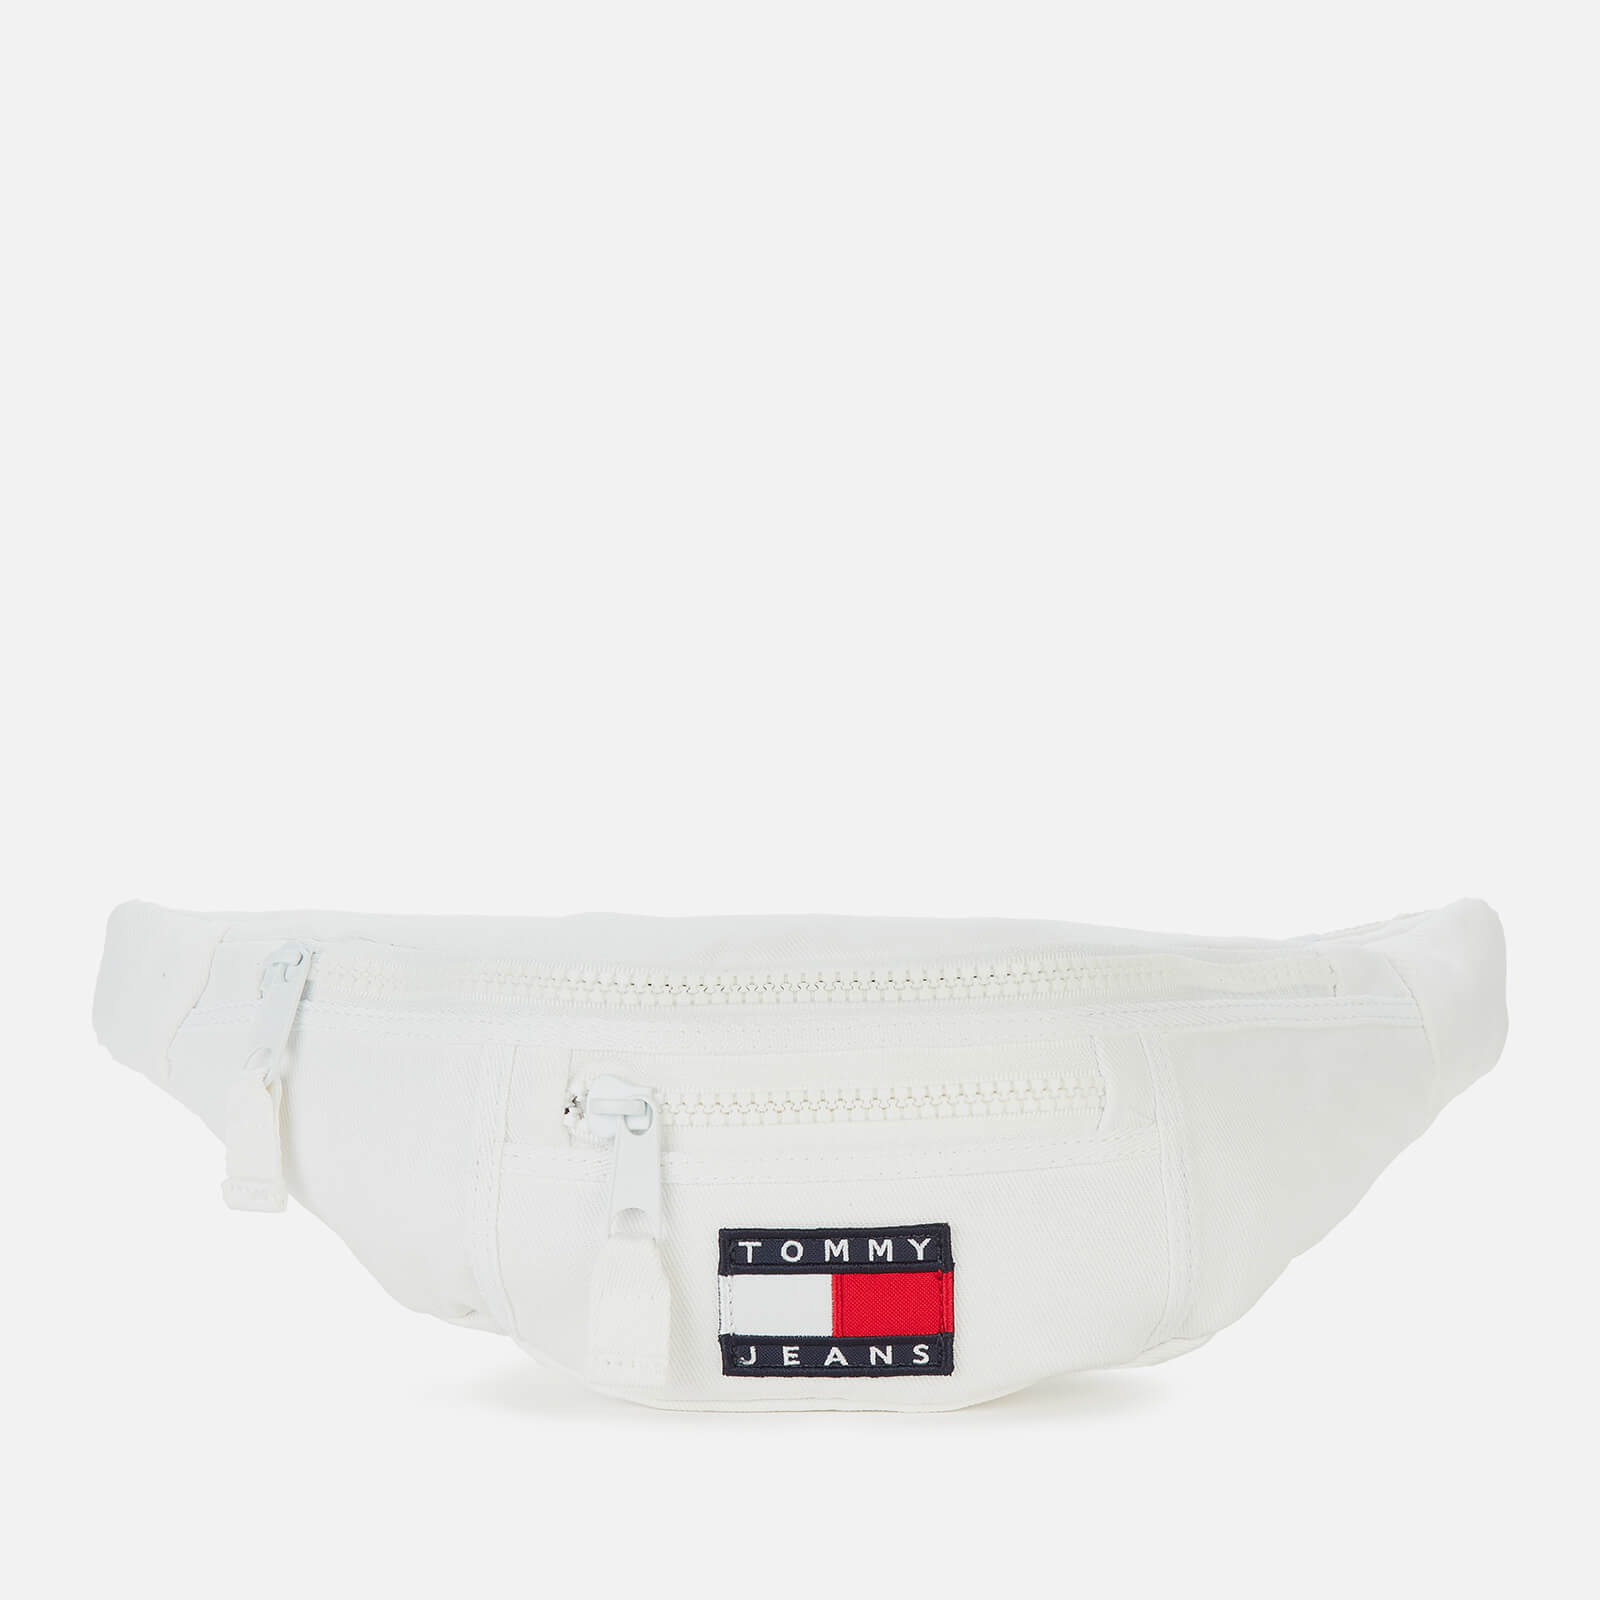 Tommy Jeans Men's Heritage Canvas Bumbag - White